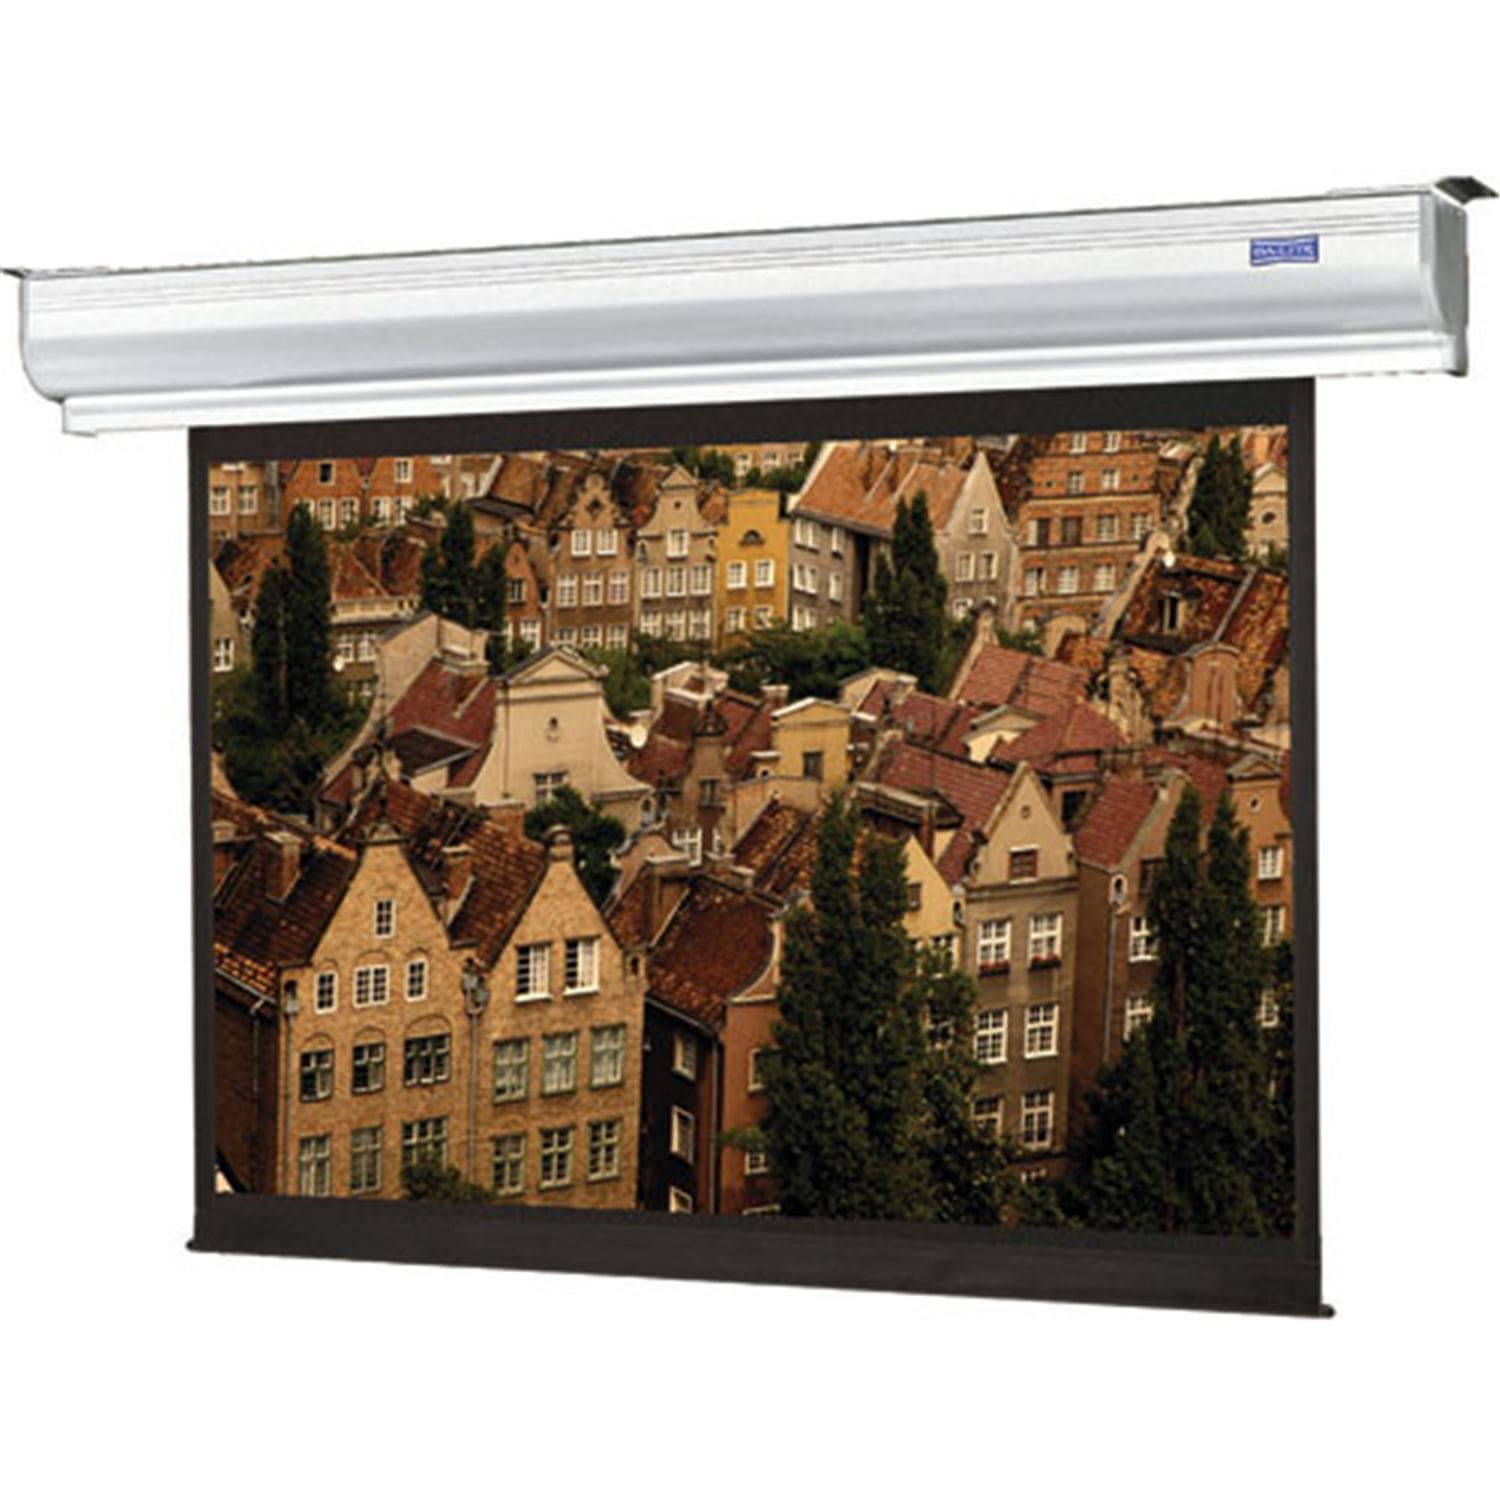 Dalite 35168 Countor Electrol 90 x 160 Hdtv Scre - ProSound and Stage Lighting